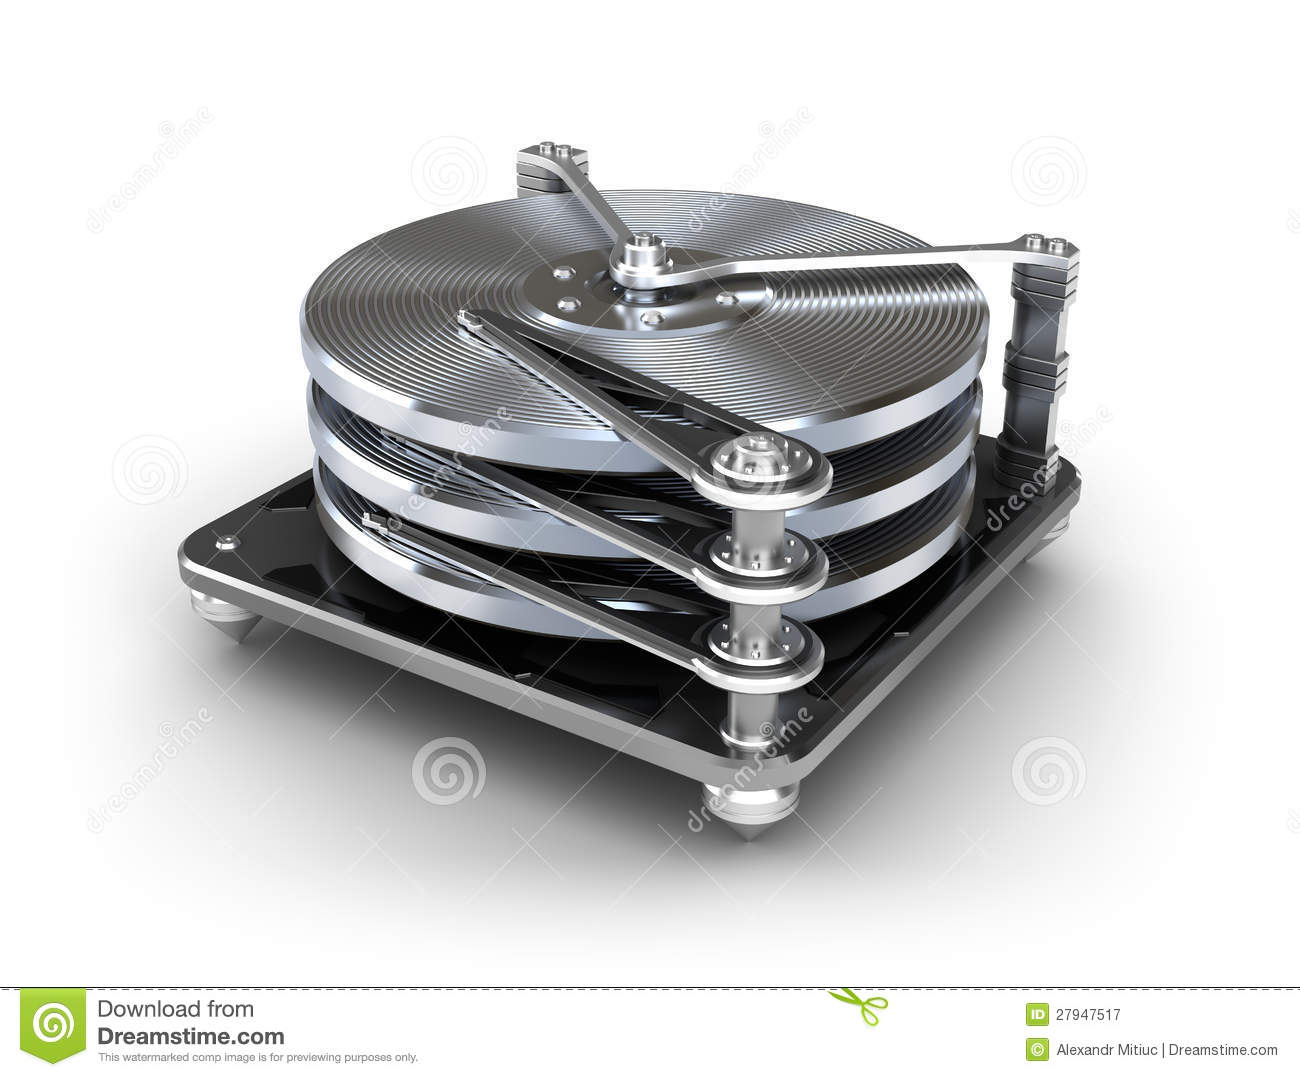 Hard Disk Drive Icon Royalty Free Stock Photography   Image  27947517